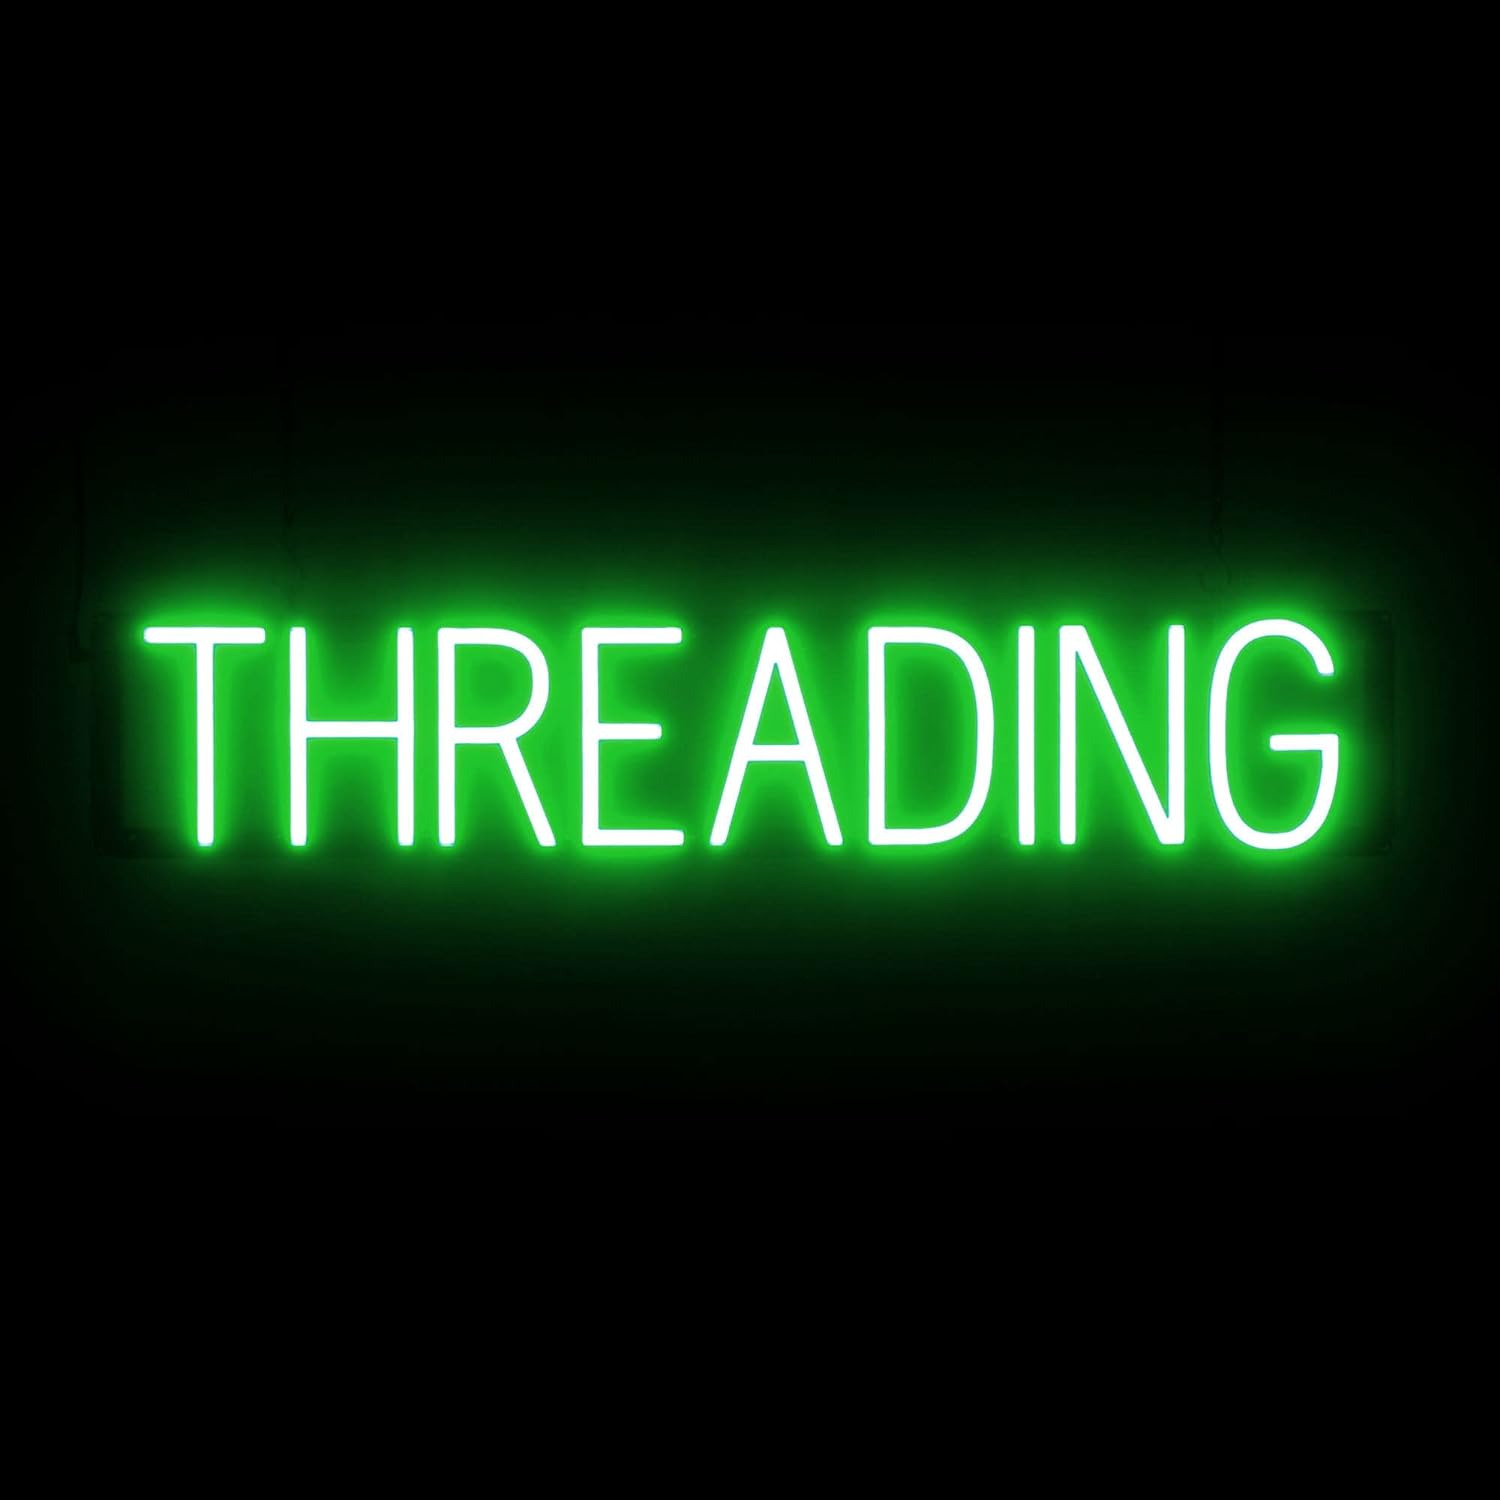 THREADING Neon-Led Sign for Beauty Salons. 33.0\